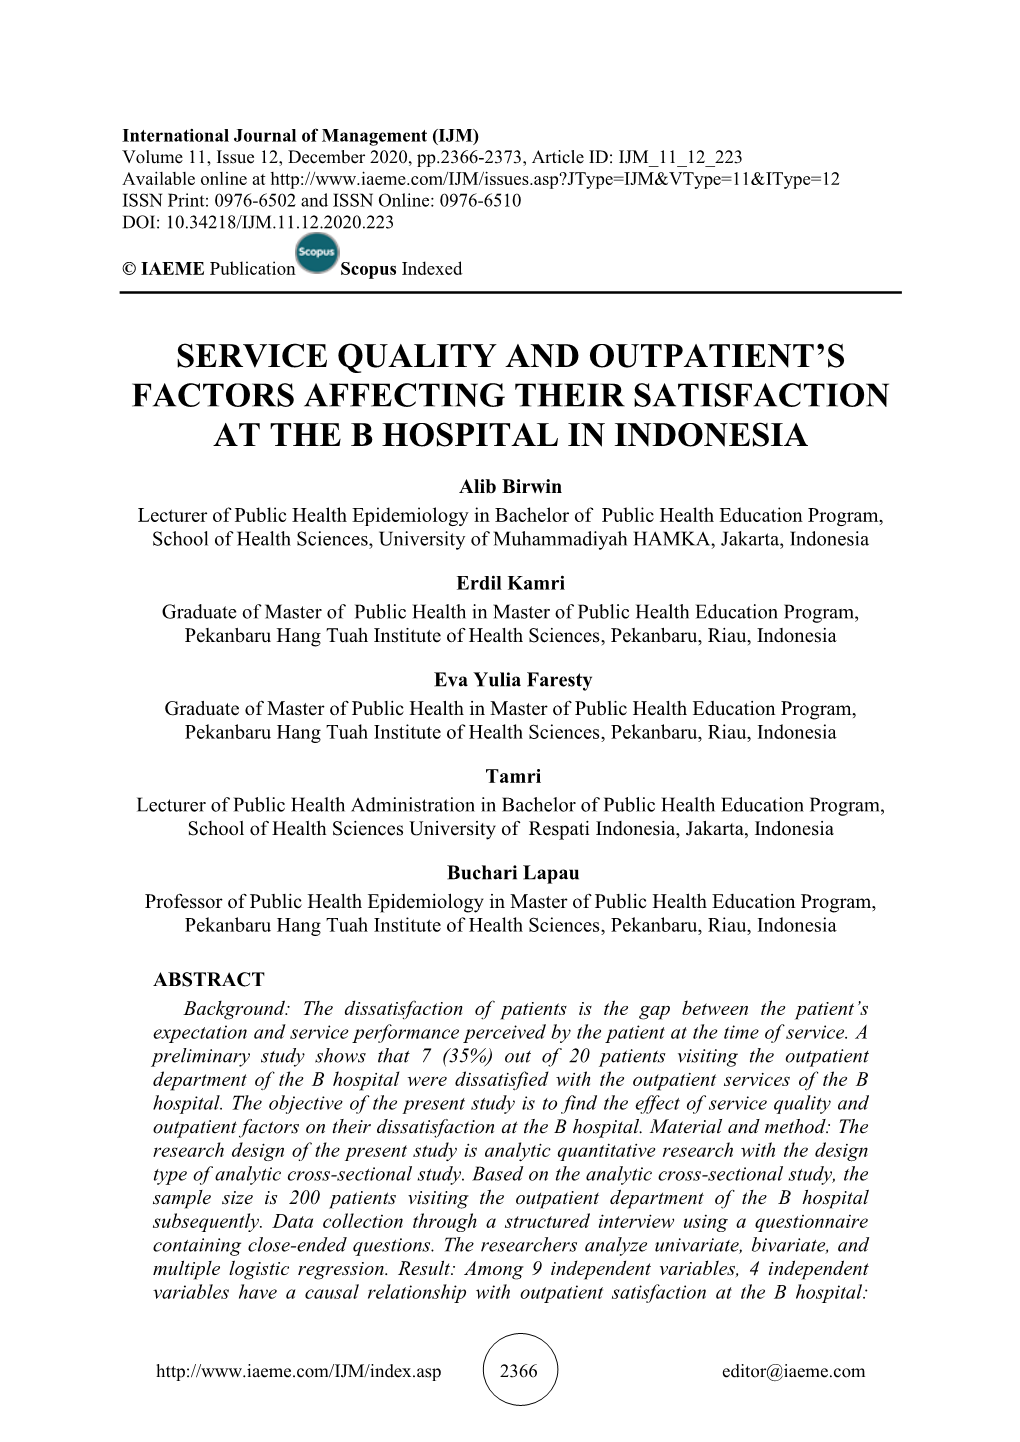 Service Quality and Outpatient's Factors Affecting Their Satisfaction at the B Hospital in Indonesia